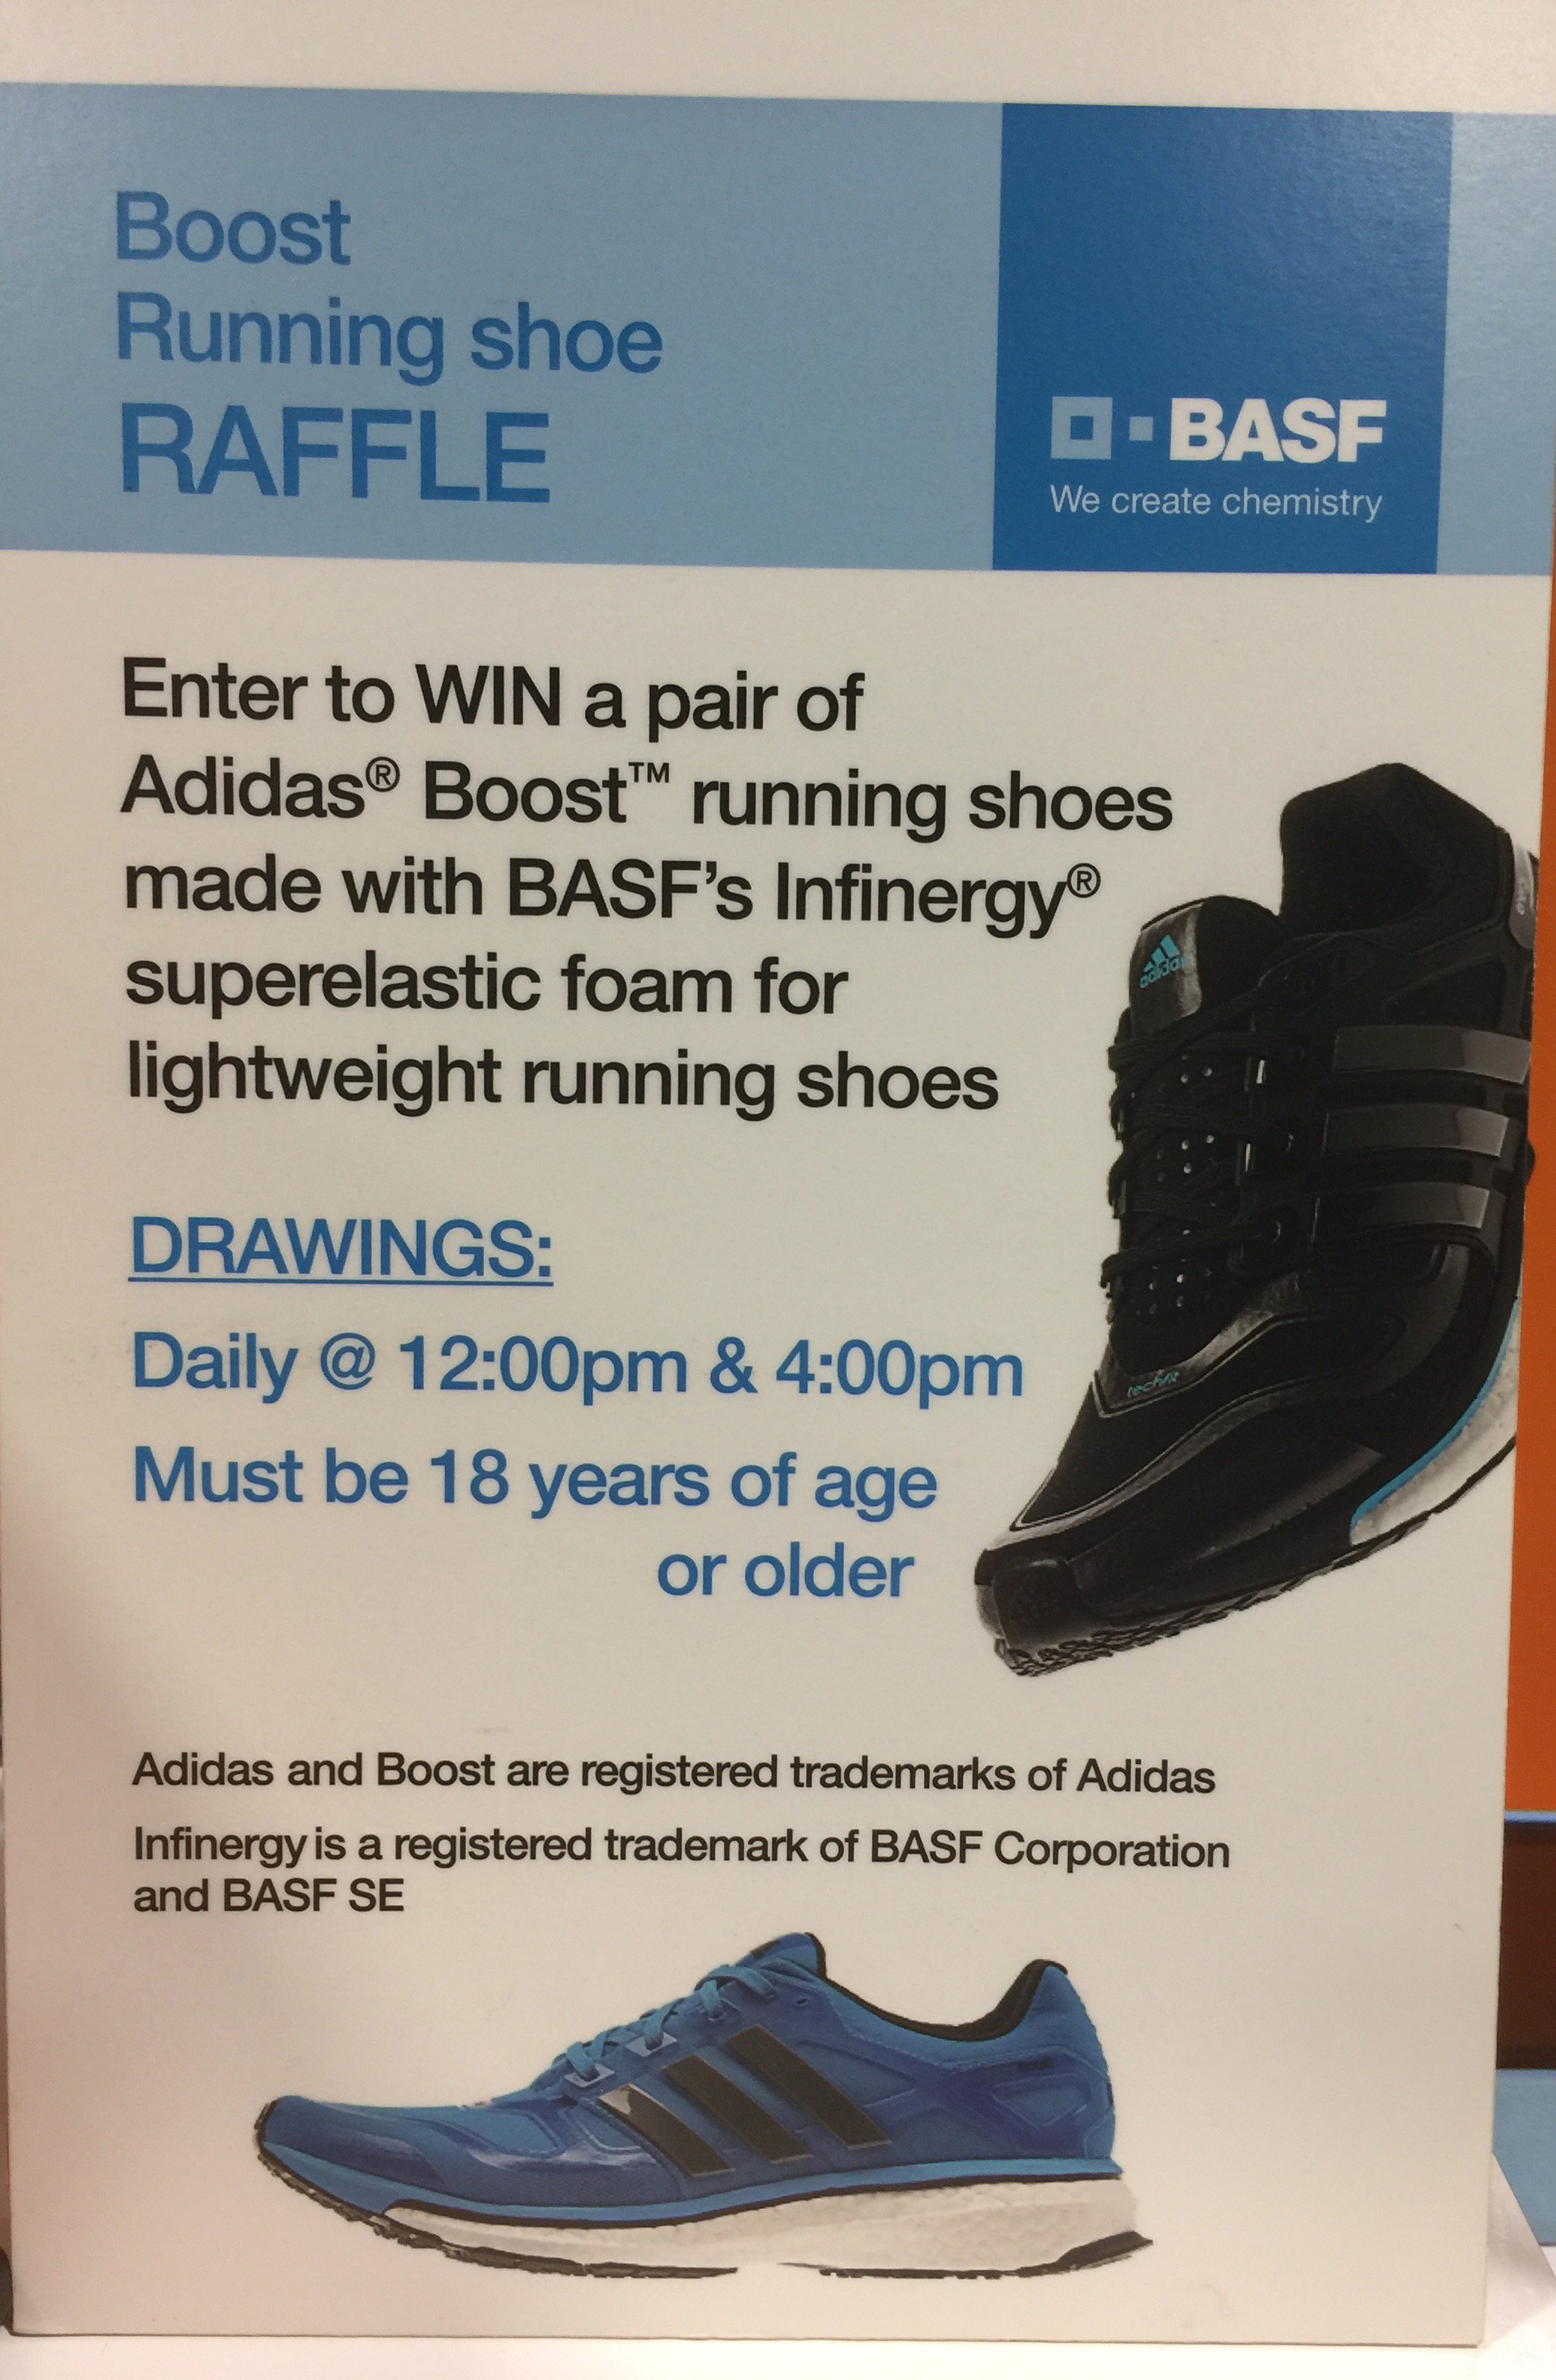 Verspreiding Perforatie Herdenkings BASF Careers NA on Twitter: "@ACSCareerNav Stop by the BASF booth today! We  are raffling off Adidas Boost running shoes again today at 12 and 4!  https://t.co/gVchD6OtWs" / Twitter